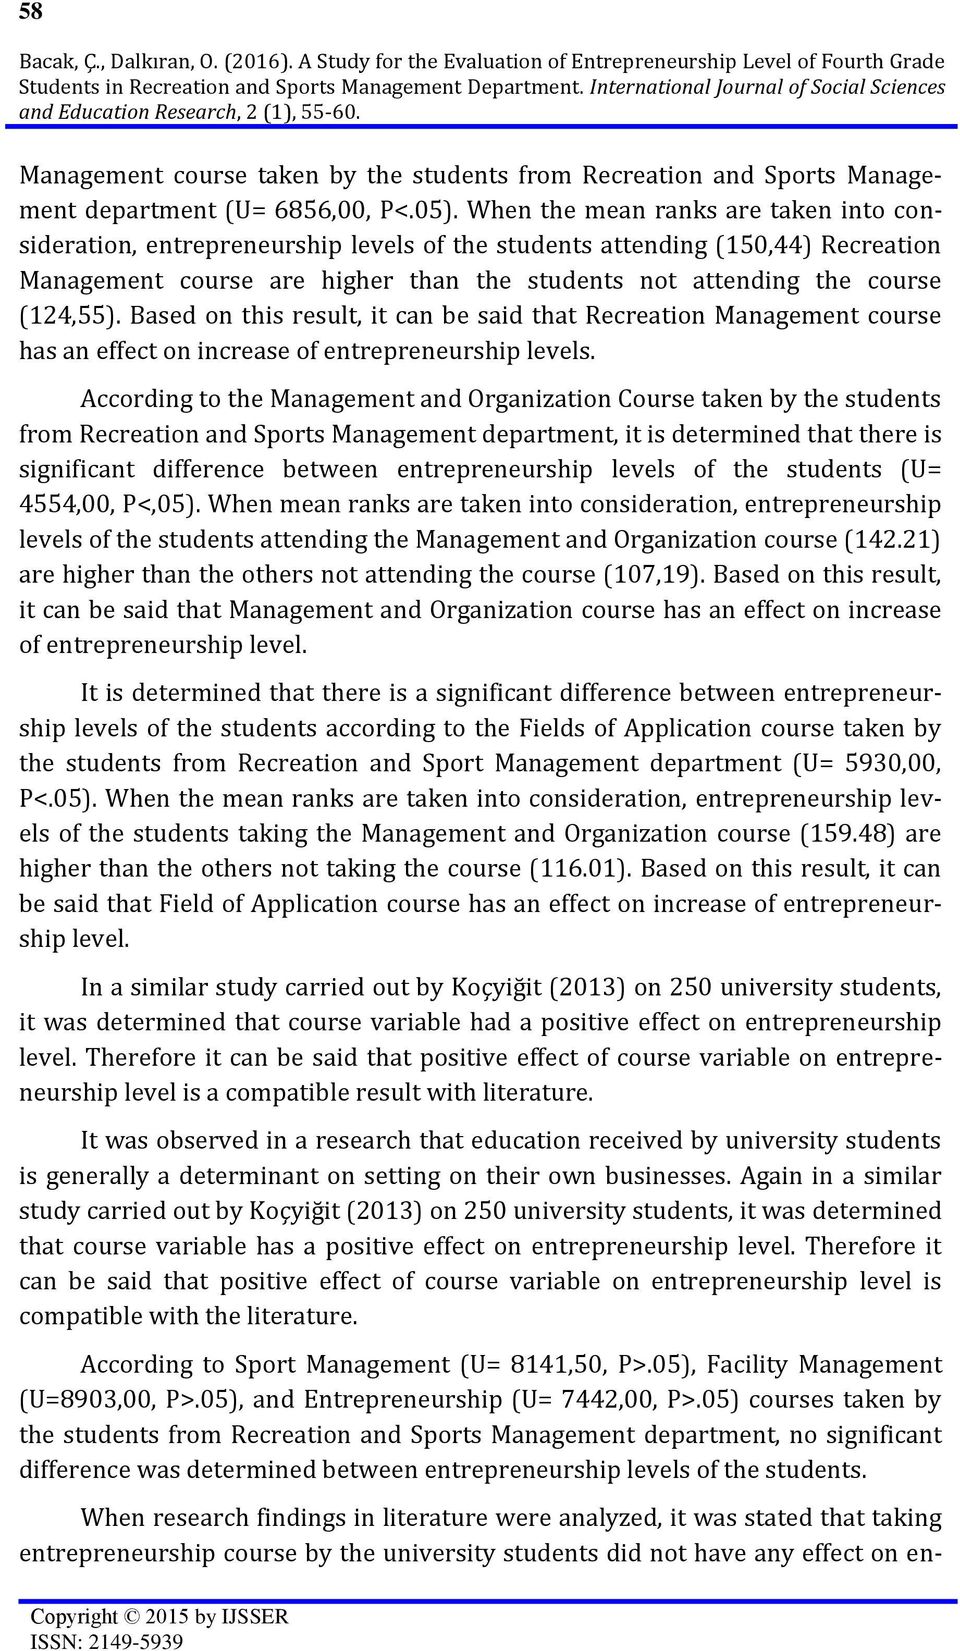 When the mean ranks are taken into consideration, entrepreneurship levels of the students attending (150,44) Recreation Management course are higher than the students not attending the course